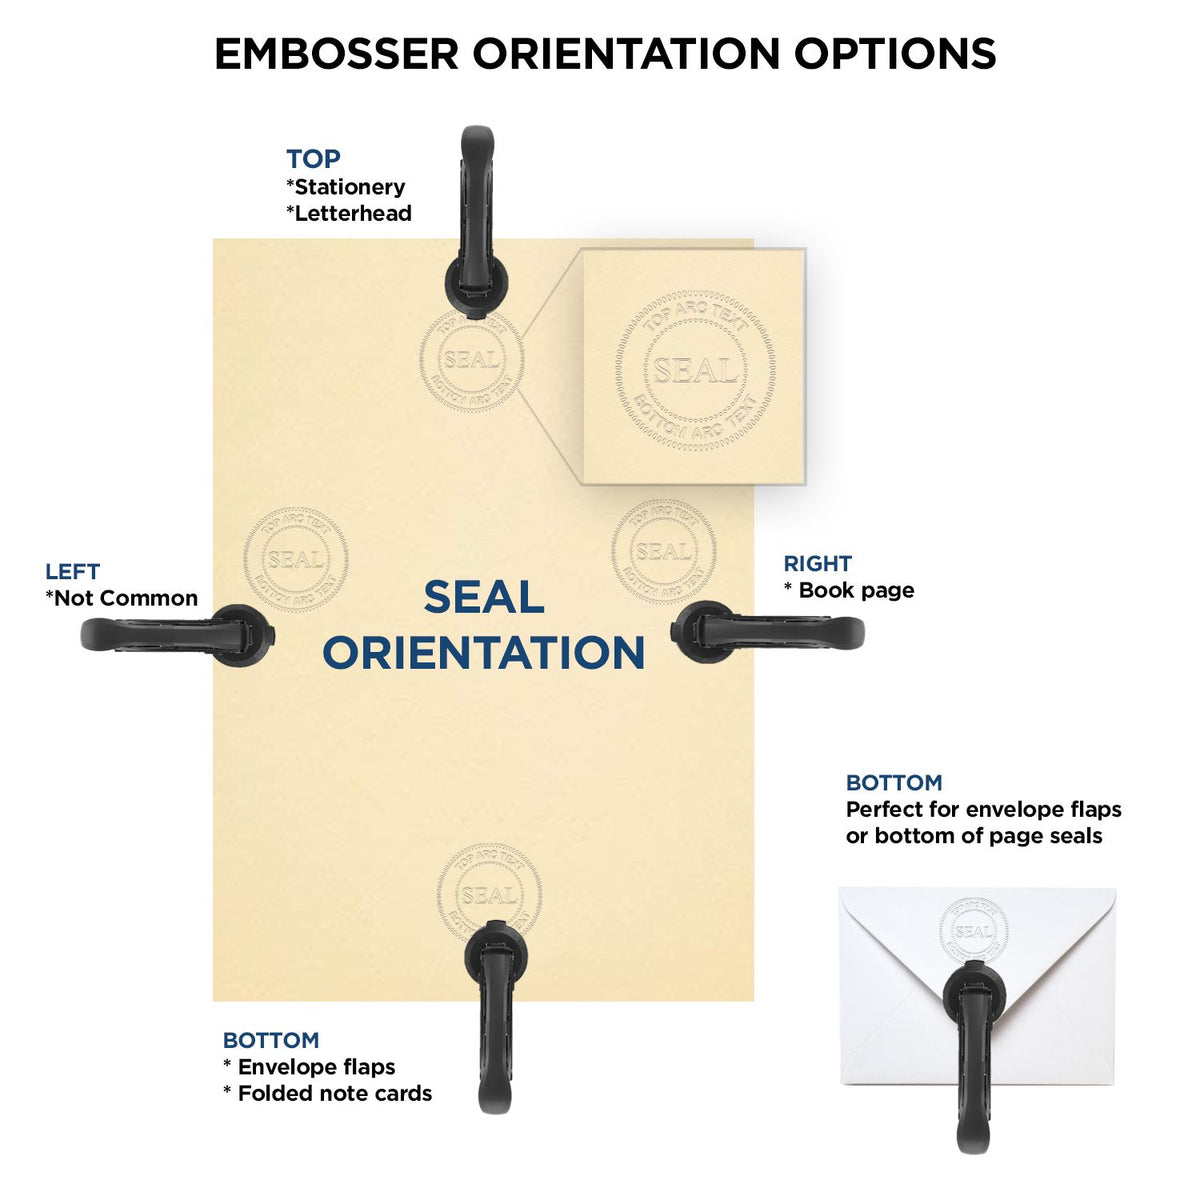 An infographic for the Oklahoma Geologist Desk Seal showing embosser orientation, this is showing examples of a top, bottom, right and left insert.